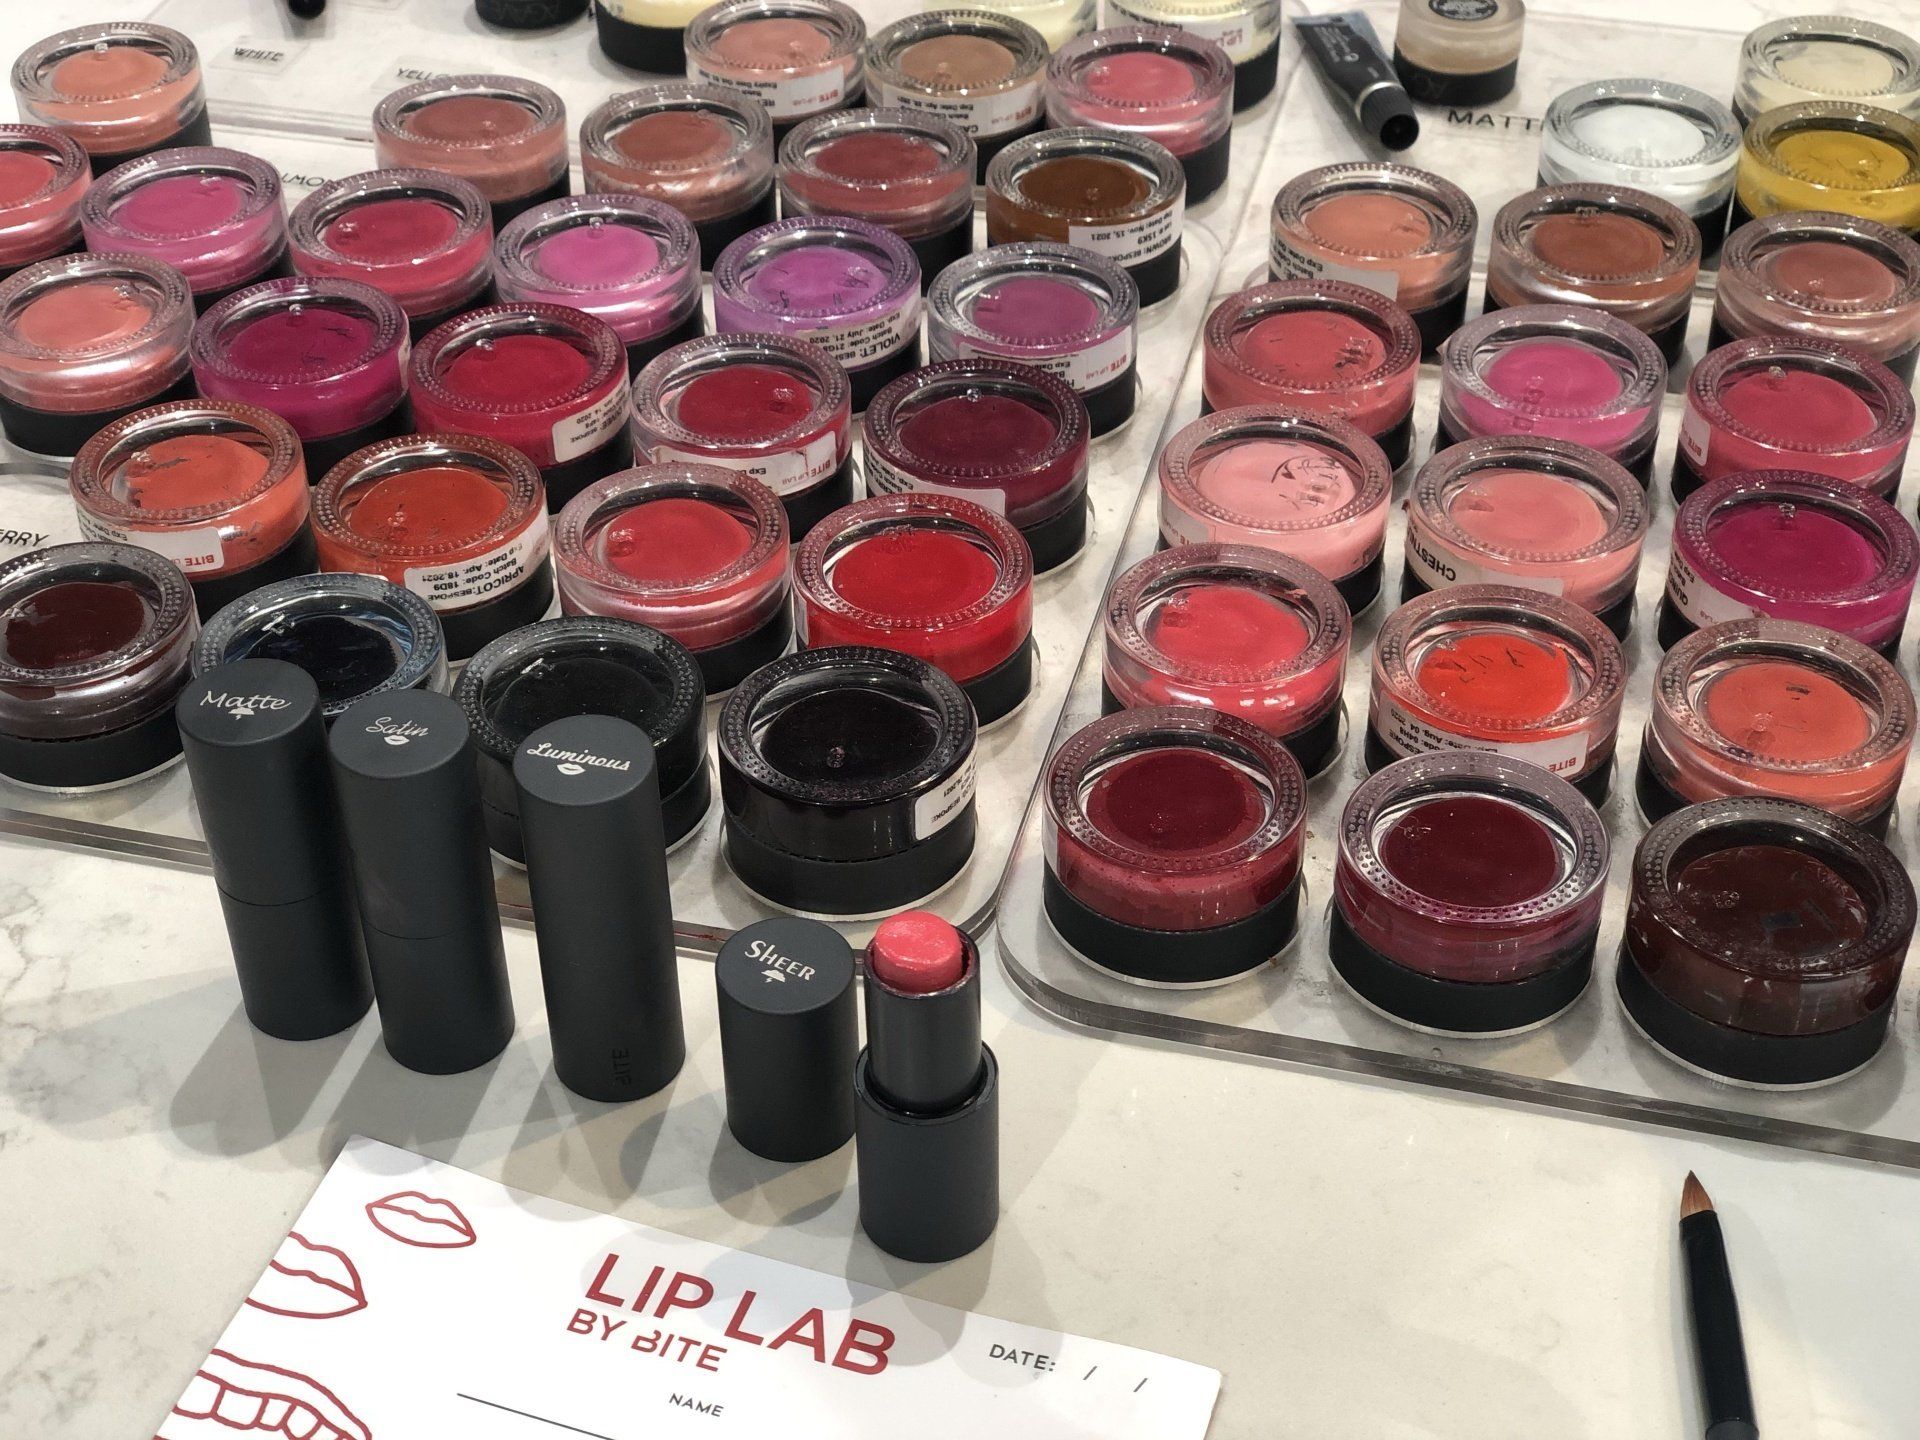 Lipstick customization using different finishes and base colors